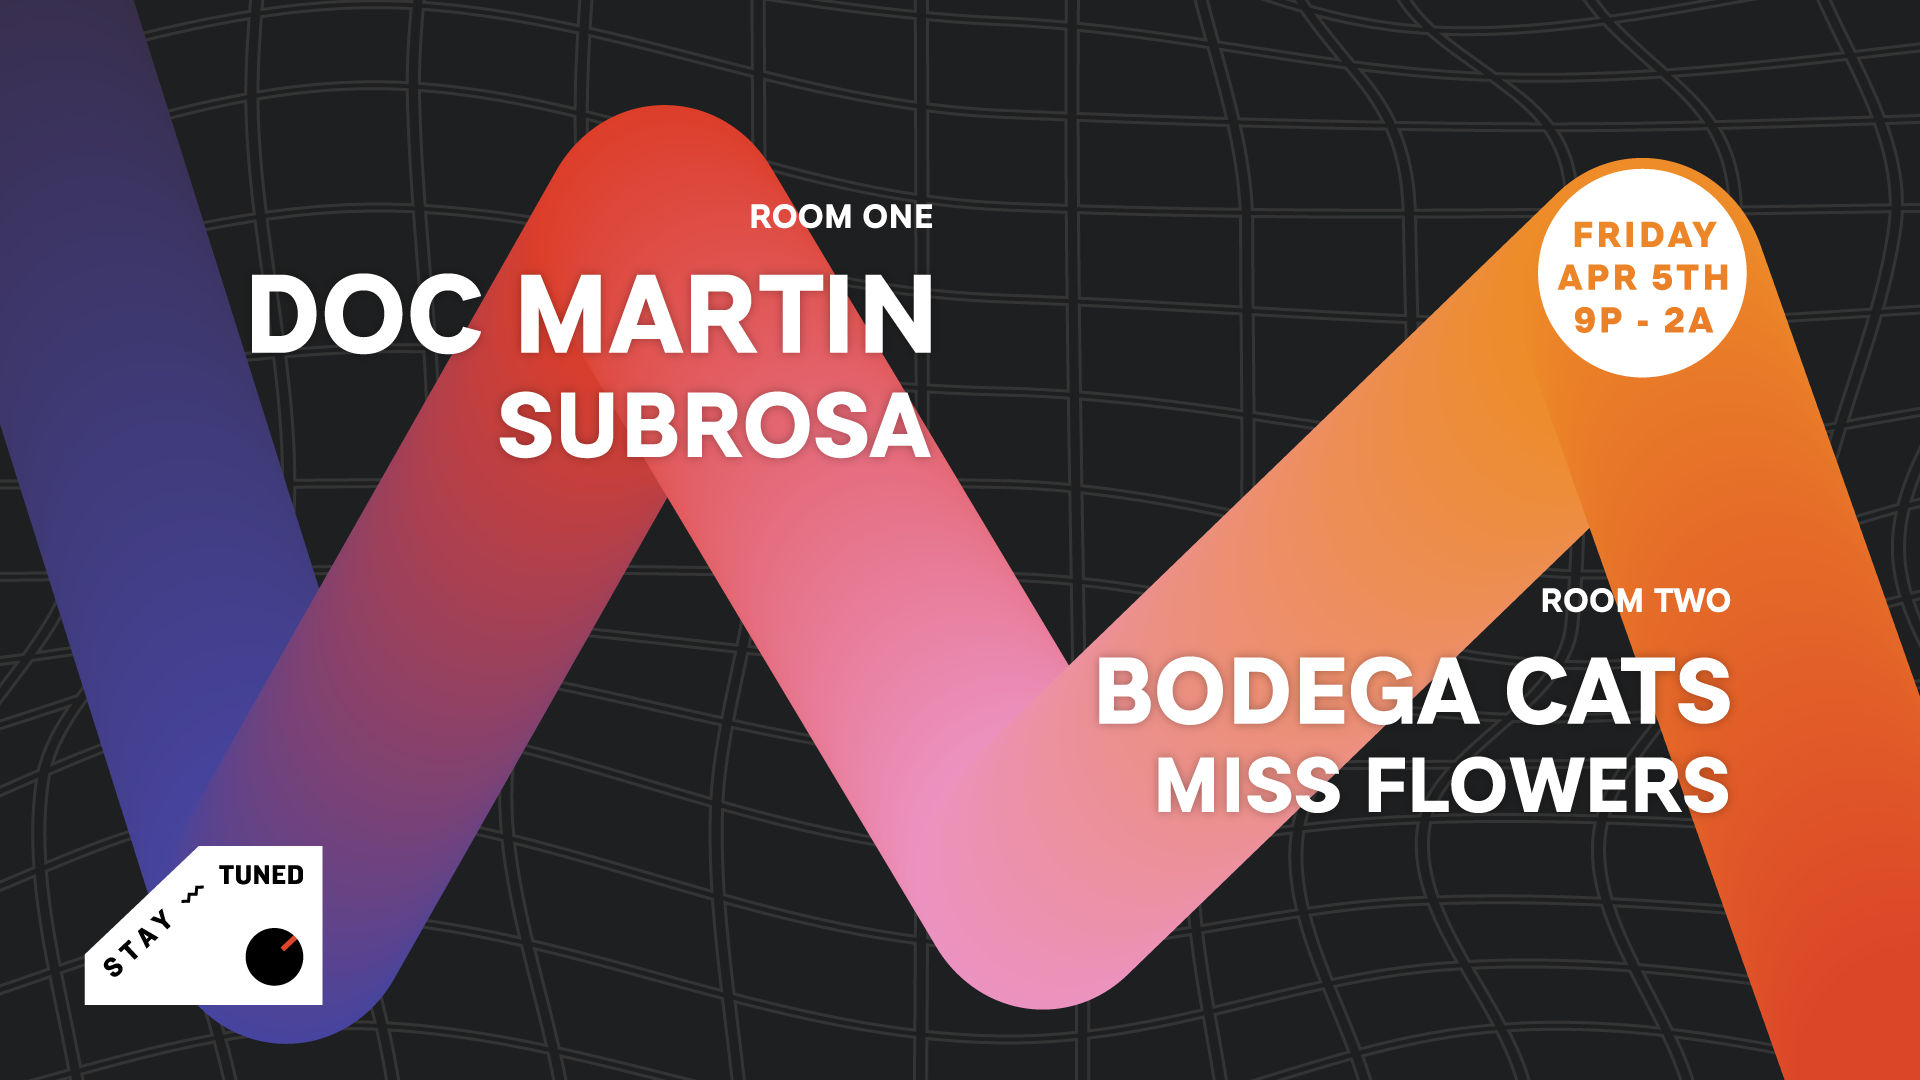 FREQUENCY: Doc Martin w/ Subrosa, Bodega Cats, Miss Flowers - フライヤー表